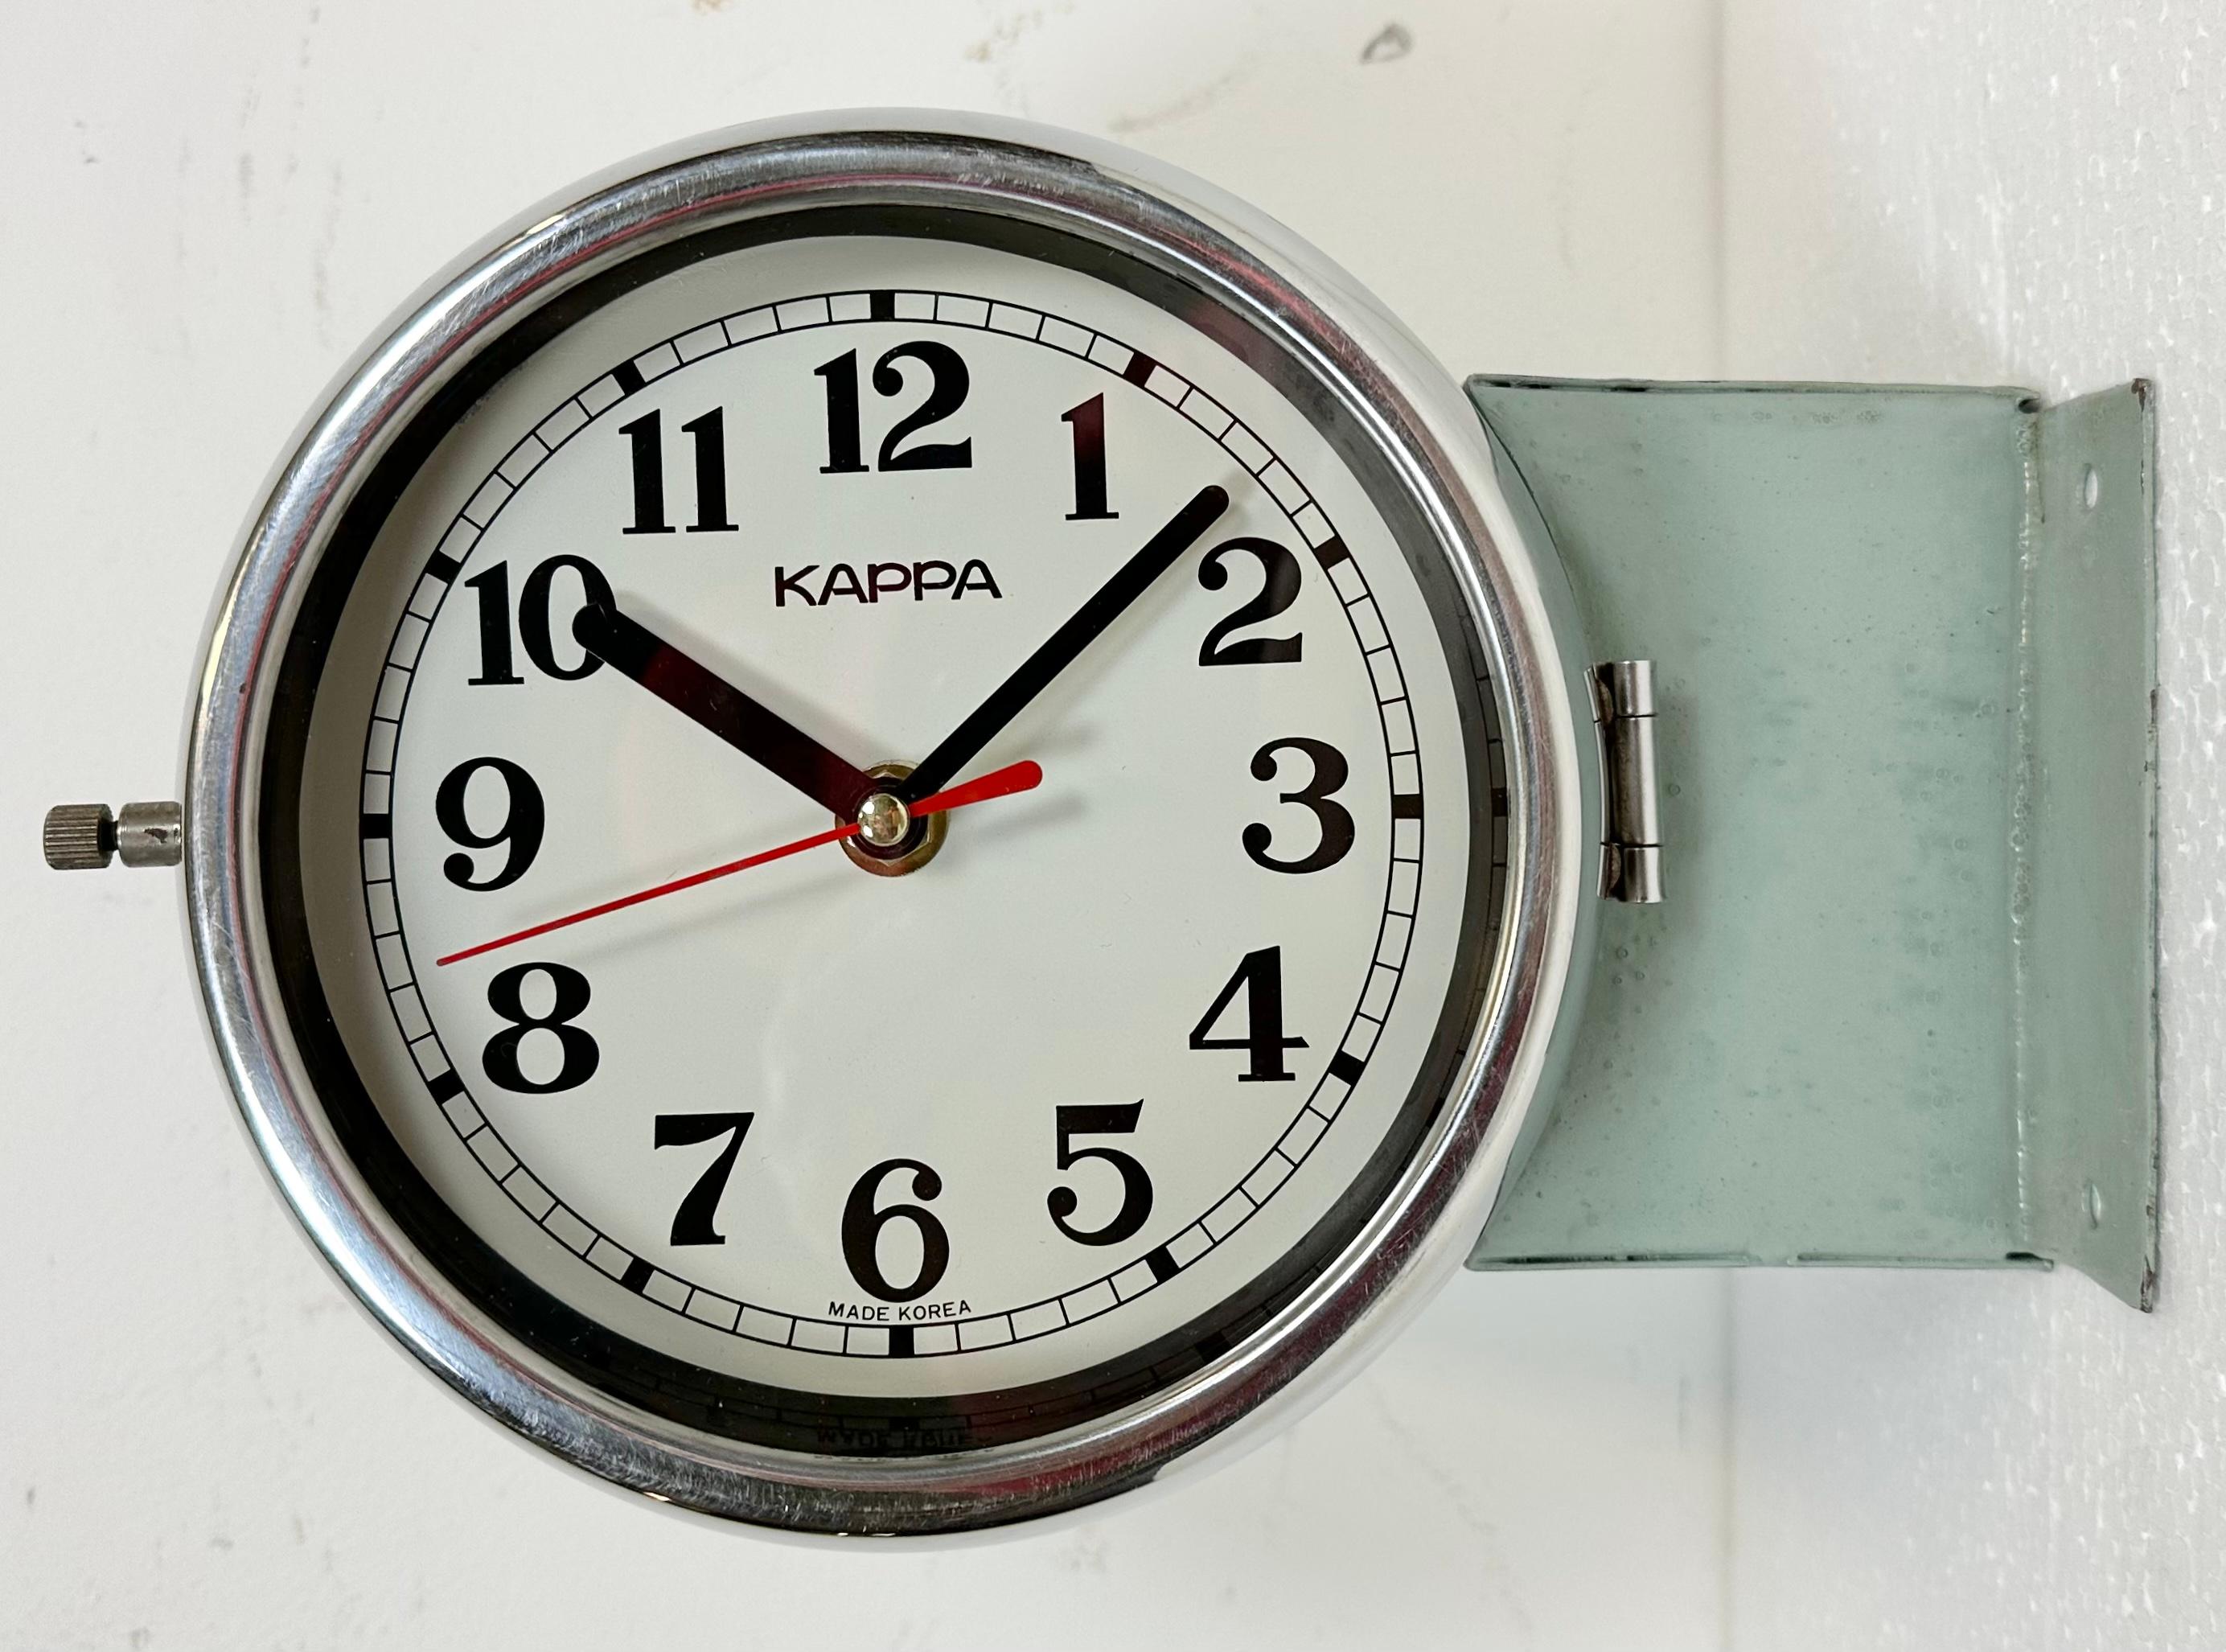 Vintage Industrial Kappa maritime clock made in South Korea during the 1980s . These clocks were used on large tankers and cargo ships. It features a light green metal body, a metal dials and a clear glass covers with chrome frames. Former slave